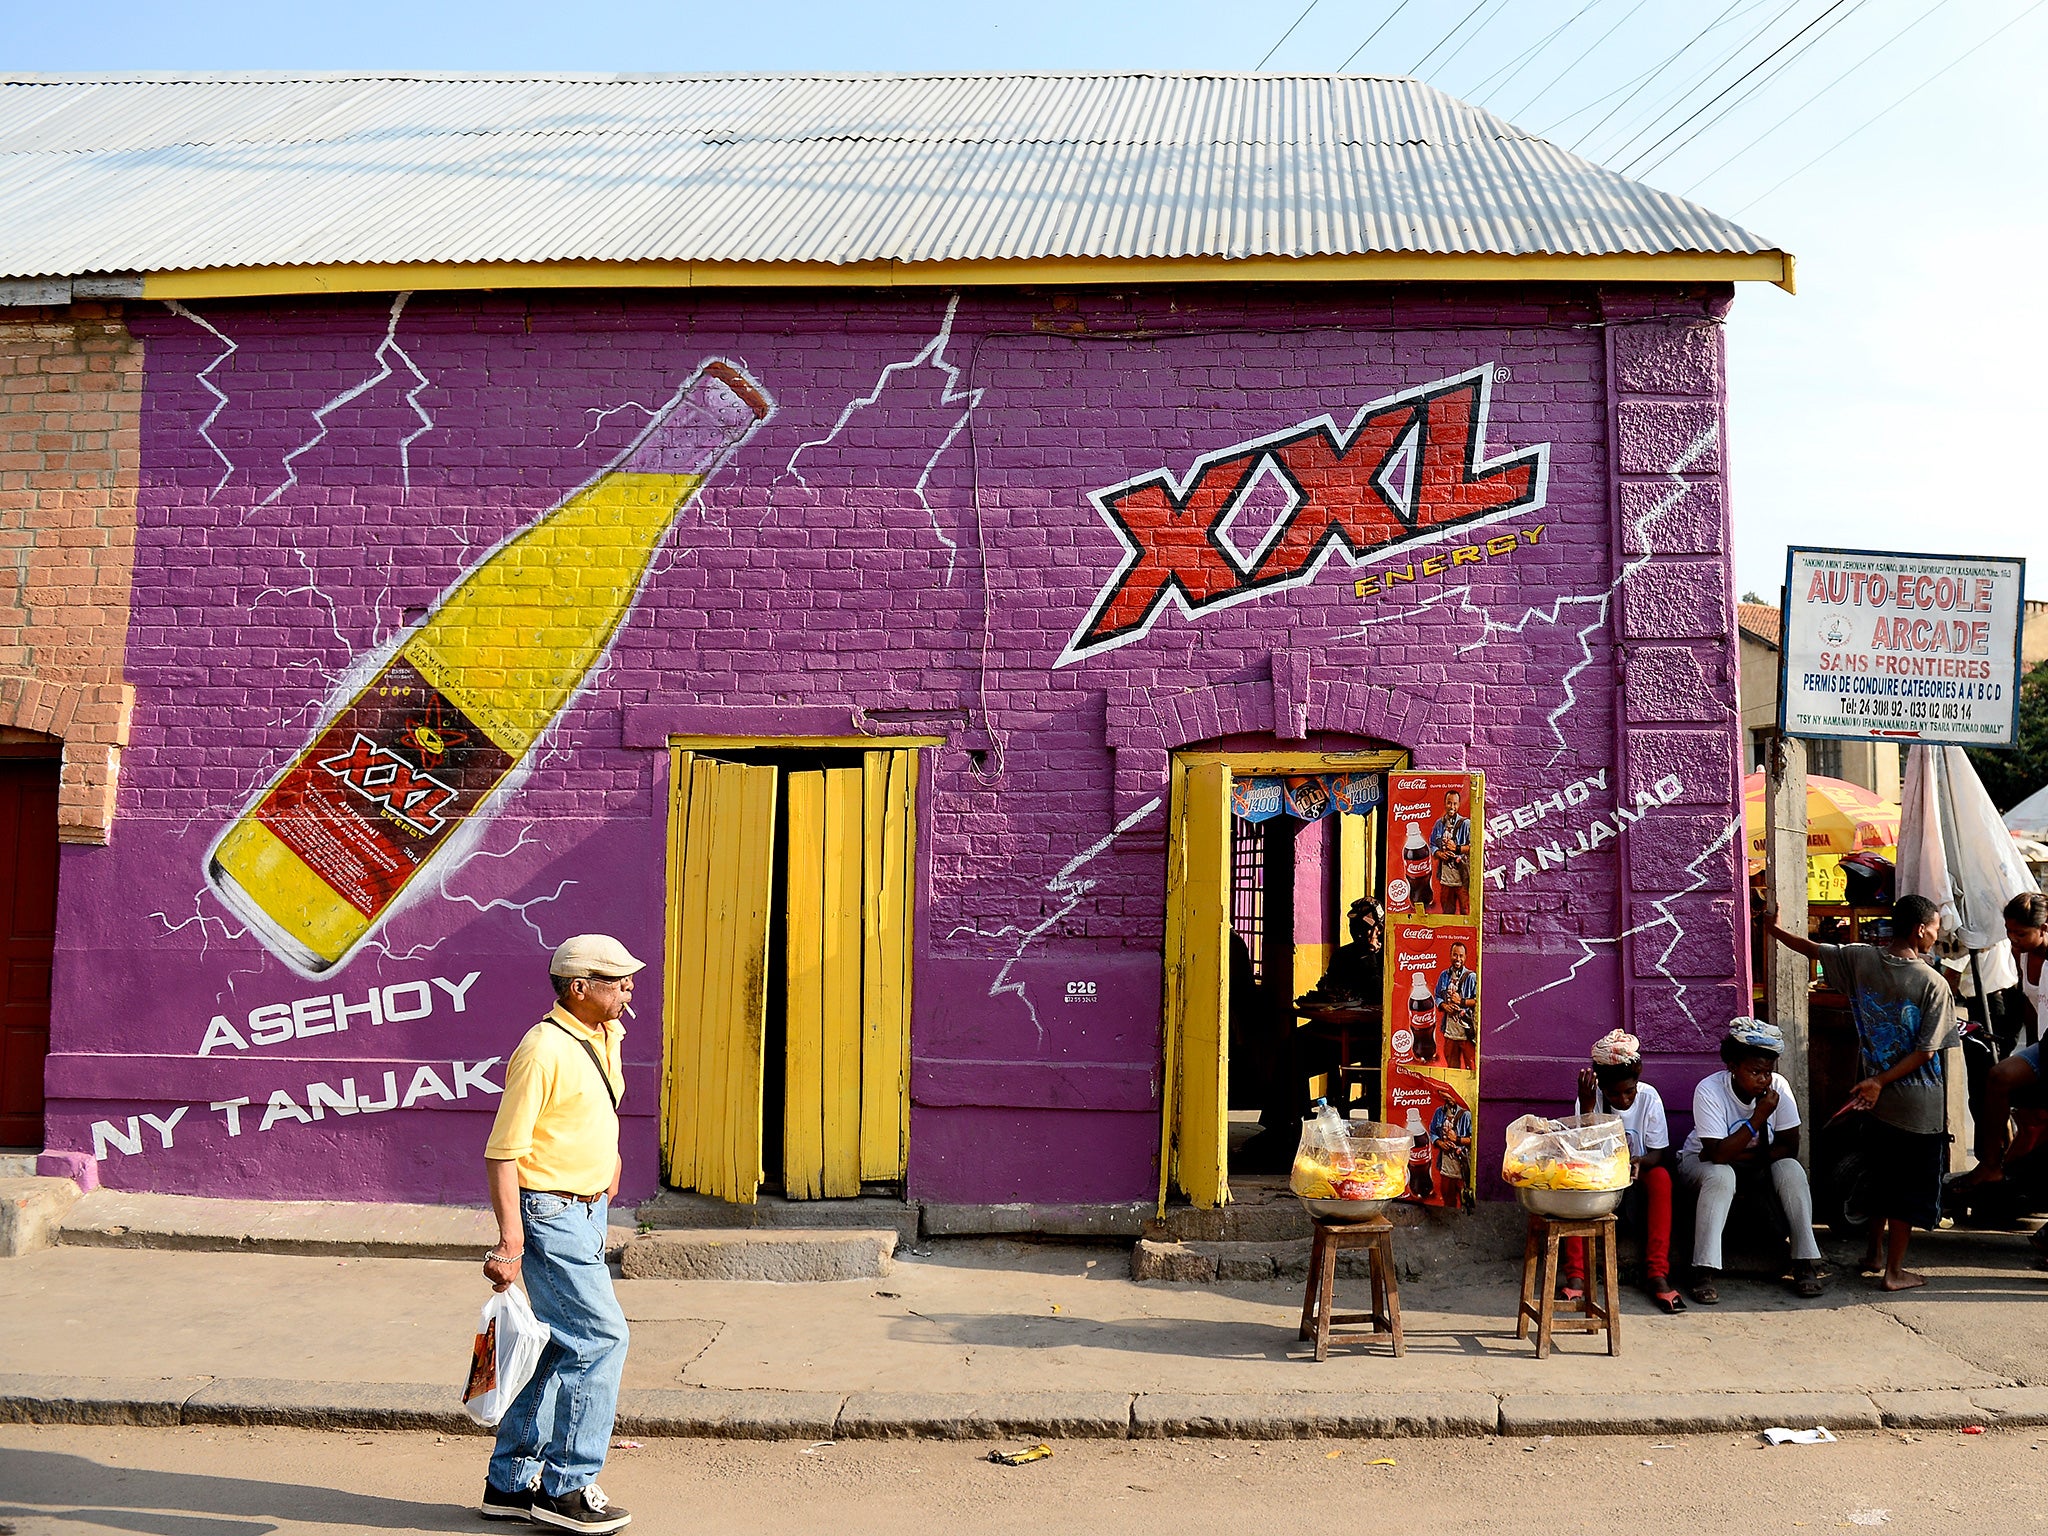 Small businesses are on the up in Africa